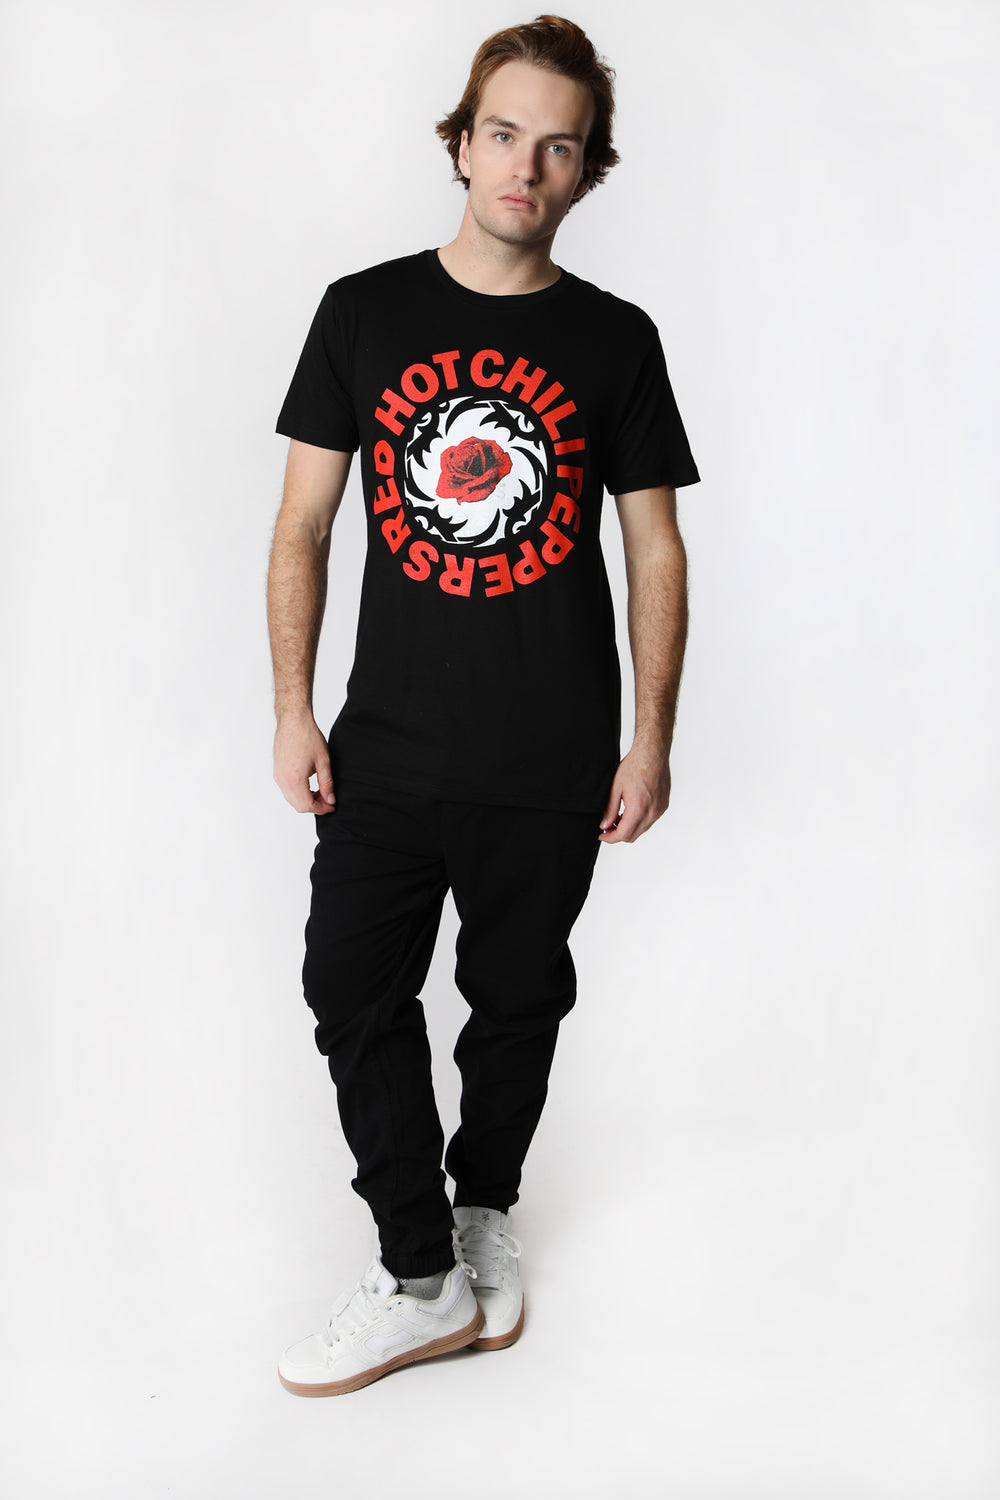 T-Shirt Imprimé Red Hot Chili Peppers Homme T-Shirt Imprimé Red Hot Chili Peppers Homme